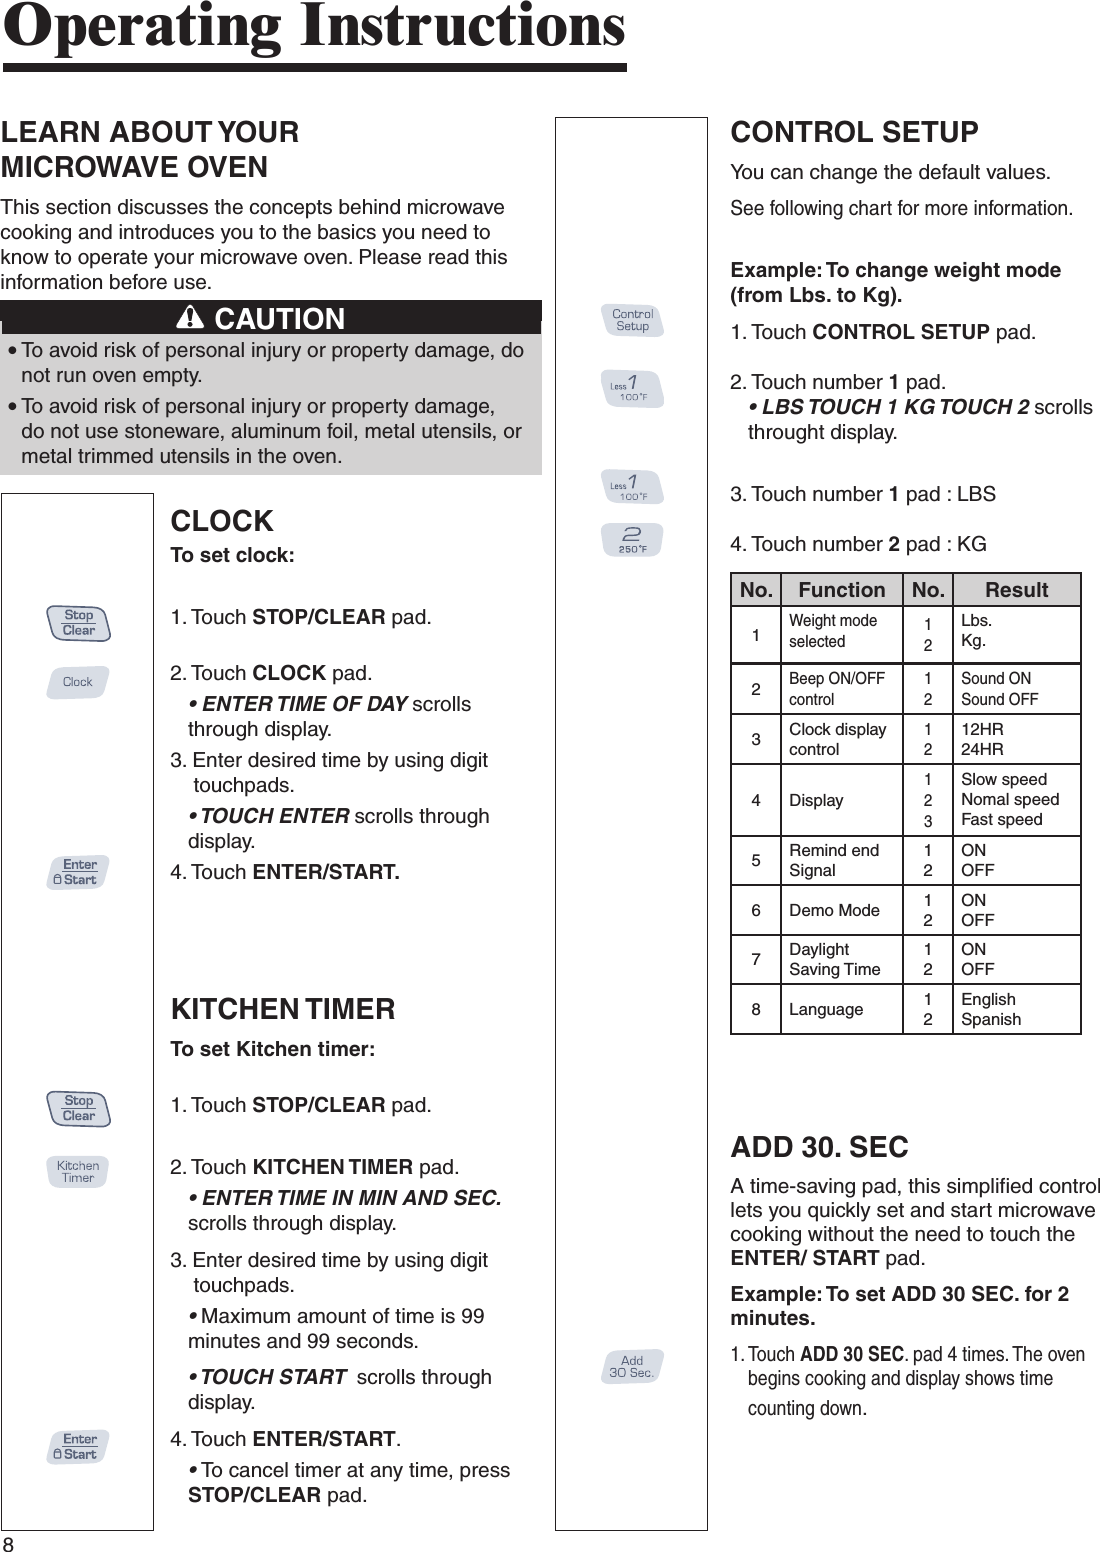 8LEARN ABOUT YOUR  MICROWAVE OVENThis section discusses the concepts behind microwave cooking and introduces you to the basics you need to know to operate your microwave oven. Please read this information before use.Operating InstructionsCAUTIONCONTROL SETUPYou can change the default values.See following chart for more information. Example: To change weight mode (from Lbs. to Kg).1.  Touch CONTROL SETUP pad.2.  Touch number 1 pad.• LBS TOUCH 1 KG TOUCH 2 scrolls throught display.3.  Touch number 1 pad : LBS4. Touch number 2 pad : KG●  To avoid risk of personal injury or property damage, do not run oven empty.●  To avoid risk of personal injury or property damage, do not use stoneware, aluminum foil, metal utensils, or metal trimmed utensils in the oven.CLOCKTo set clock:1. Touch STOP/CLEAR pad. 2. Touch CLOCK pad.• ENTER TIME OF DAY scrolls through display.3. Enter desired time by using digit      touchpads.• TOUCH ENTER scrolls through display.4. Touch ENTER/START.KITCHEN TIMERTo set Kitchen timer:1. Touch STOP/CLEAR pad.2. Touch KITCHEN TIMER pad.• ENTER TIME IN MIN AND SEC. scrolls through display.3. Enter desired time by using digit      touchpads.• Maximum amount of time is 99 minutes and 99 seconds.• TOUCH START  scrolls through display.4. Touch ENTER/START.• To cancel timer at any time, press STOP/CLEAR pad.ADD 30. SECA time-saving pad, this simplified control lets you quickly set and start microwave cooking without the need to touch the ENTER/ START pad.Example: To set ADD 30 SEC. for 2 minutes.1.  Touch ADD 30 SEC. pad 4 times. The oven begins cooking and display shows time counting down. No. Function No. Result1Weight mode selected12Lbs.Kg.2Beep ON/OFF control12Sound ON Sound OFF3Clock display control1212HR24HR4 Display123Slow speedNomal speedFast speed5Remind end Signal12ONOFF6 Demo Mode 12ONOFF7Daylight Saving Time12ONOFF8 Language 1 2EnglishSpanish